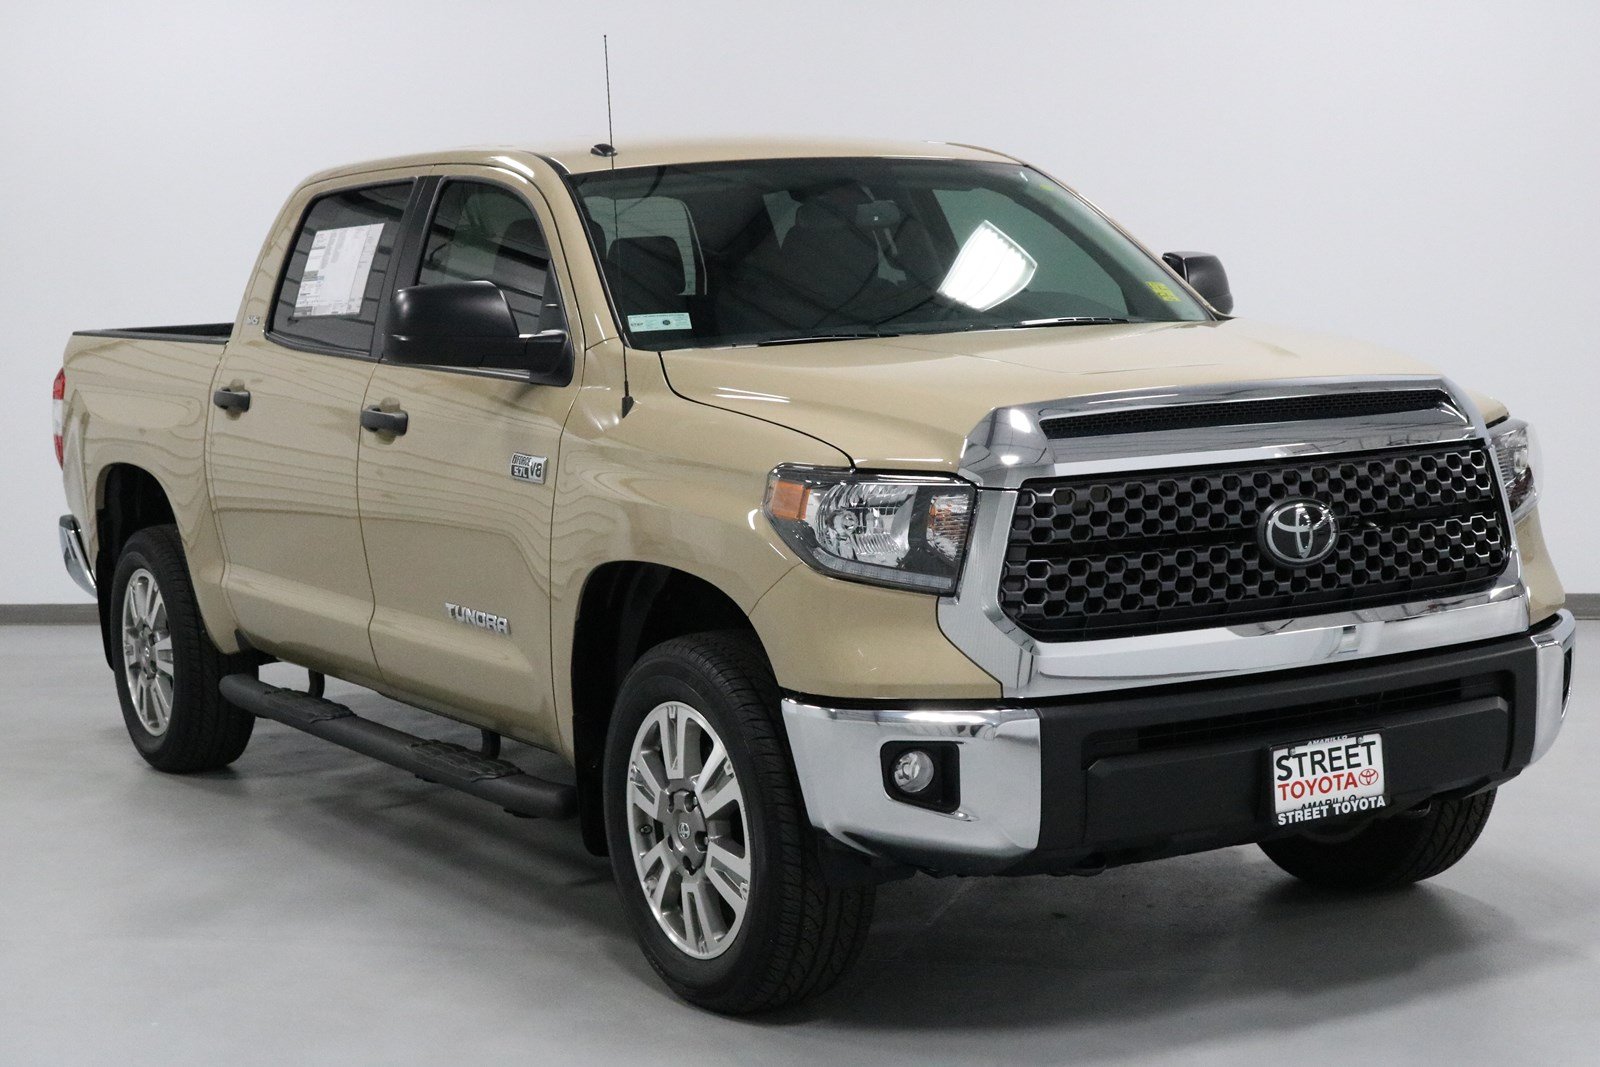 Research the New 2018 Toyota TUNDRA 4X4 for sale in Amarillo, TX. Learn